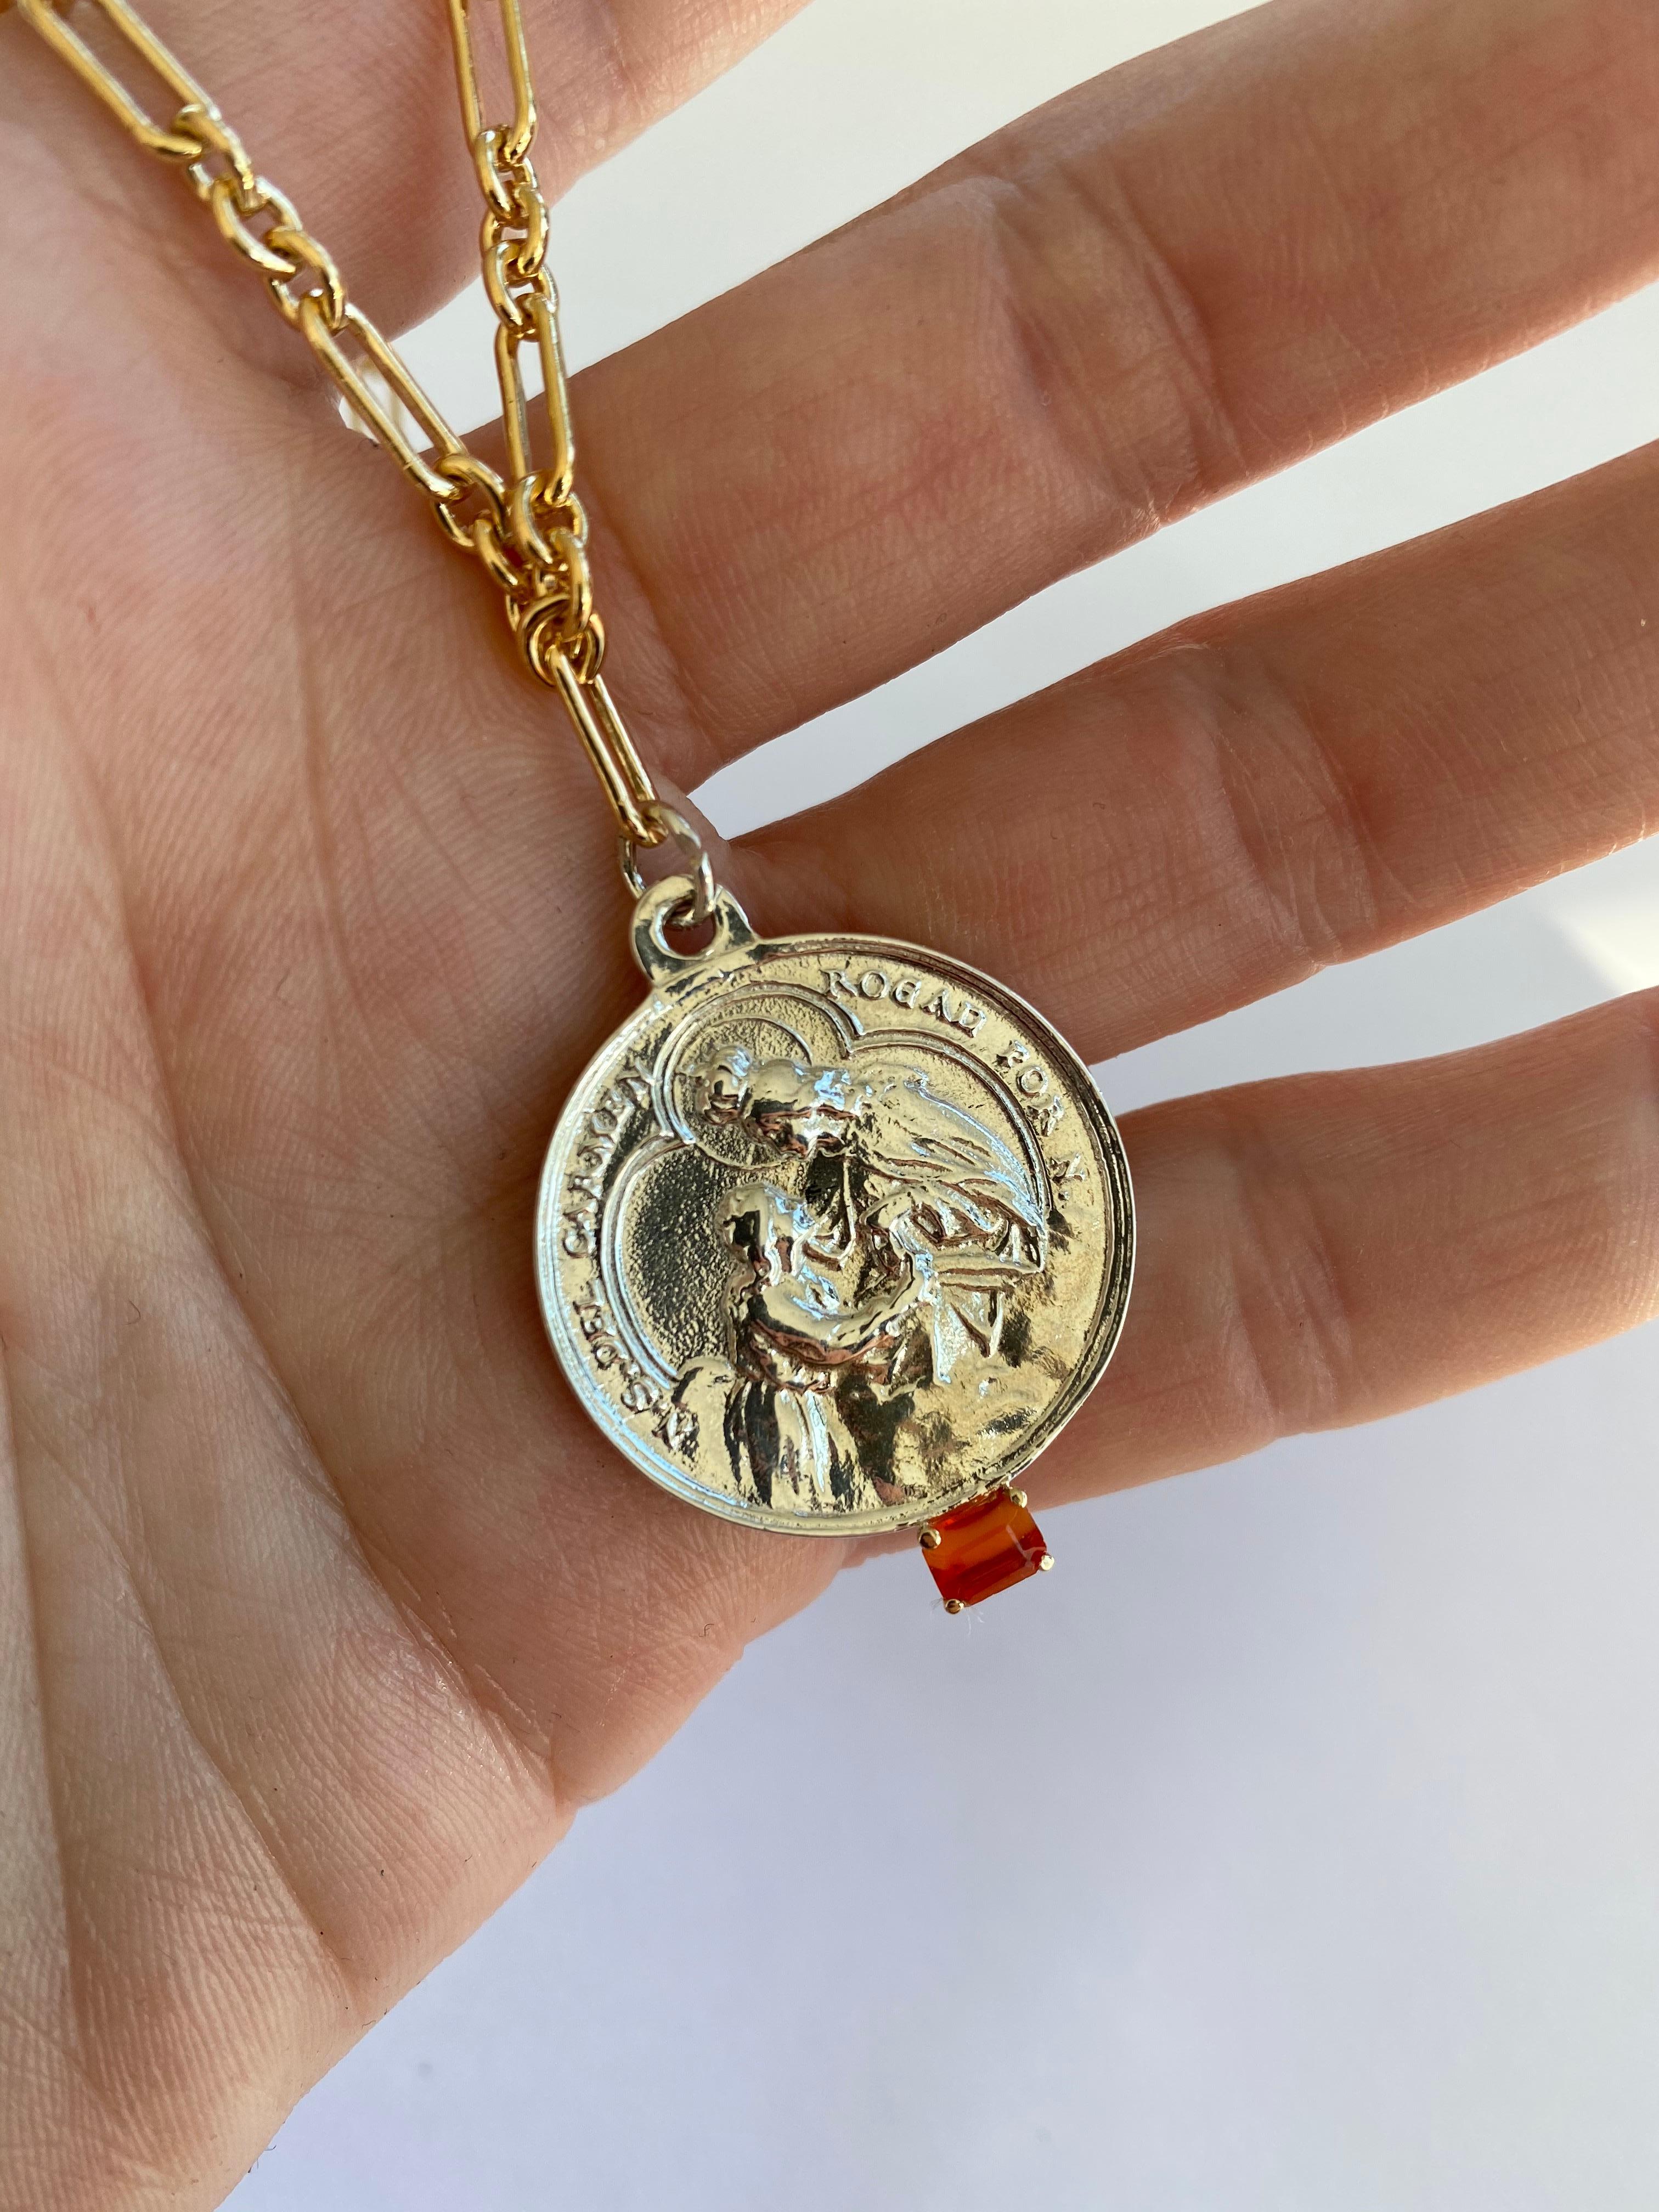 Contemporary Fire Opal  Gold Filled Chain Necklace Virgin Mary Medal Silver Pendant J Dauphin For Sale